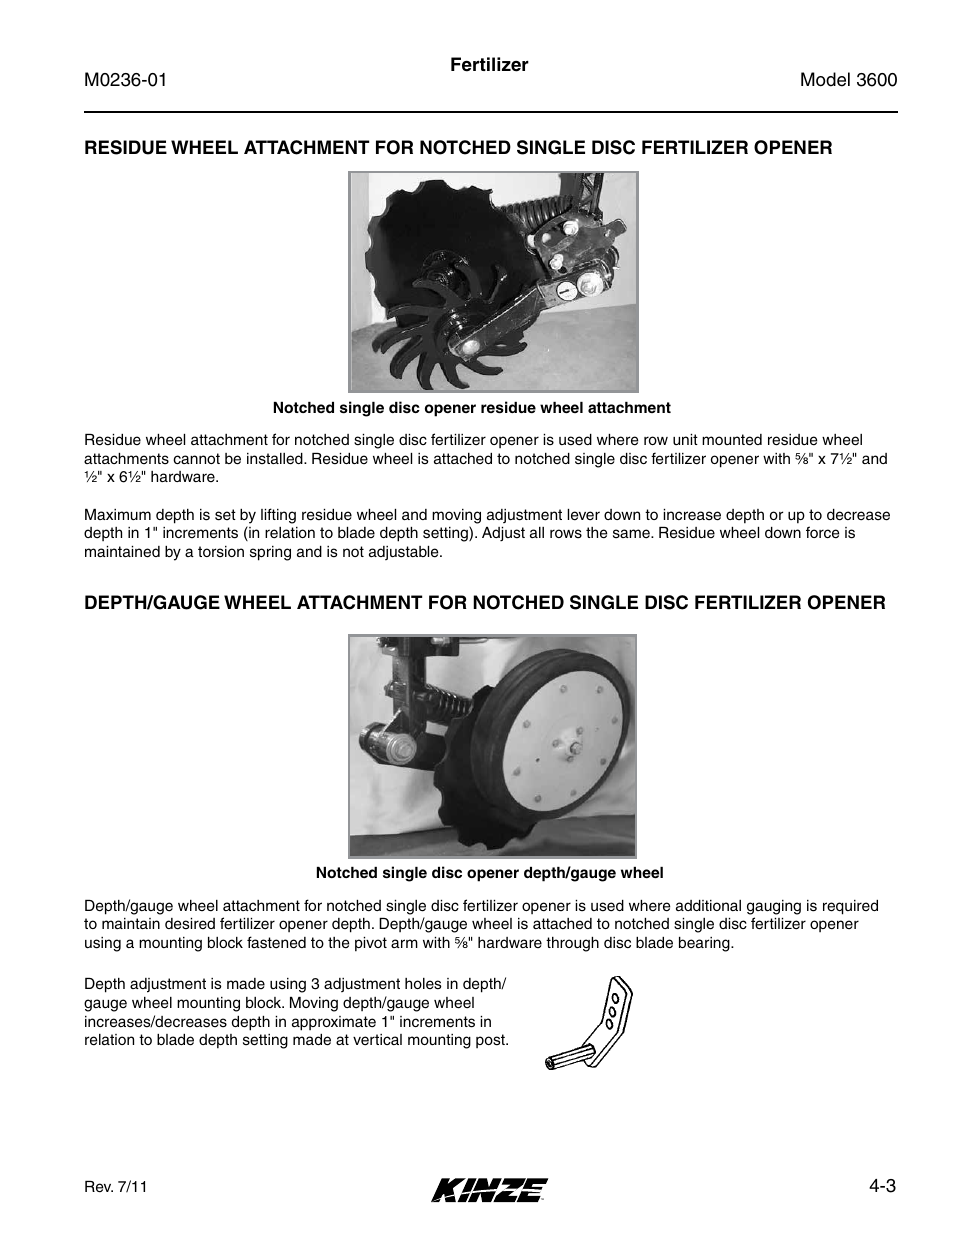 Fertilizer opener -3 | Kinze 3600 Lift and Rotate Planter Rev. 7/14 User Manual | Page 71 / 172